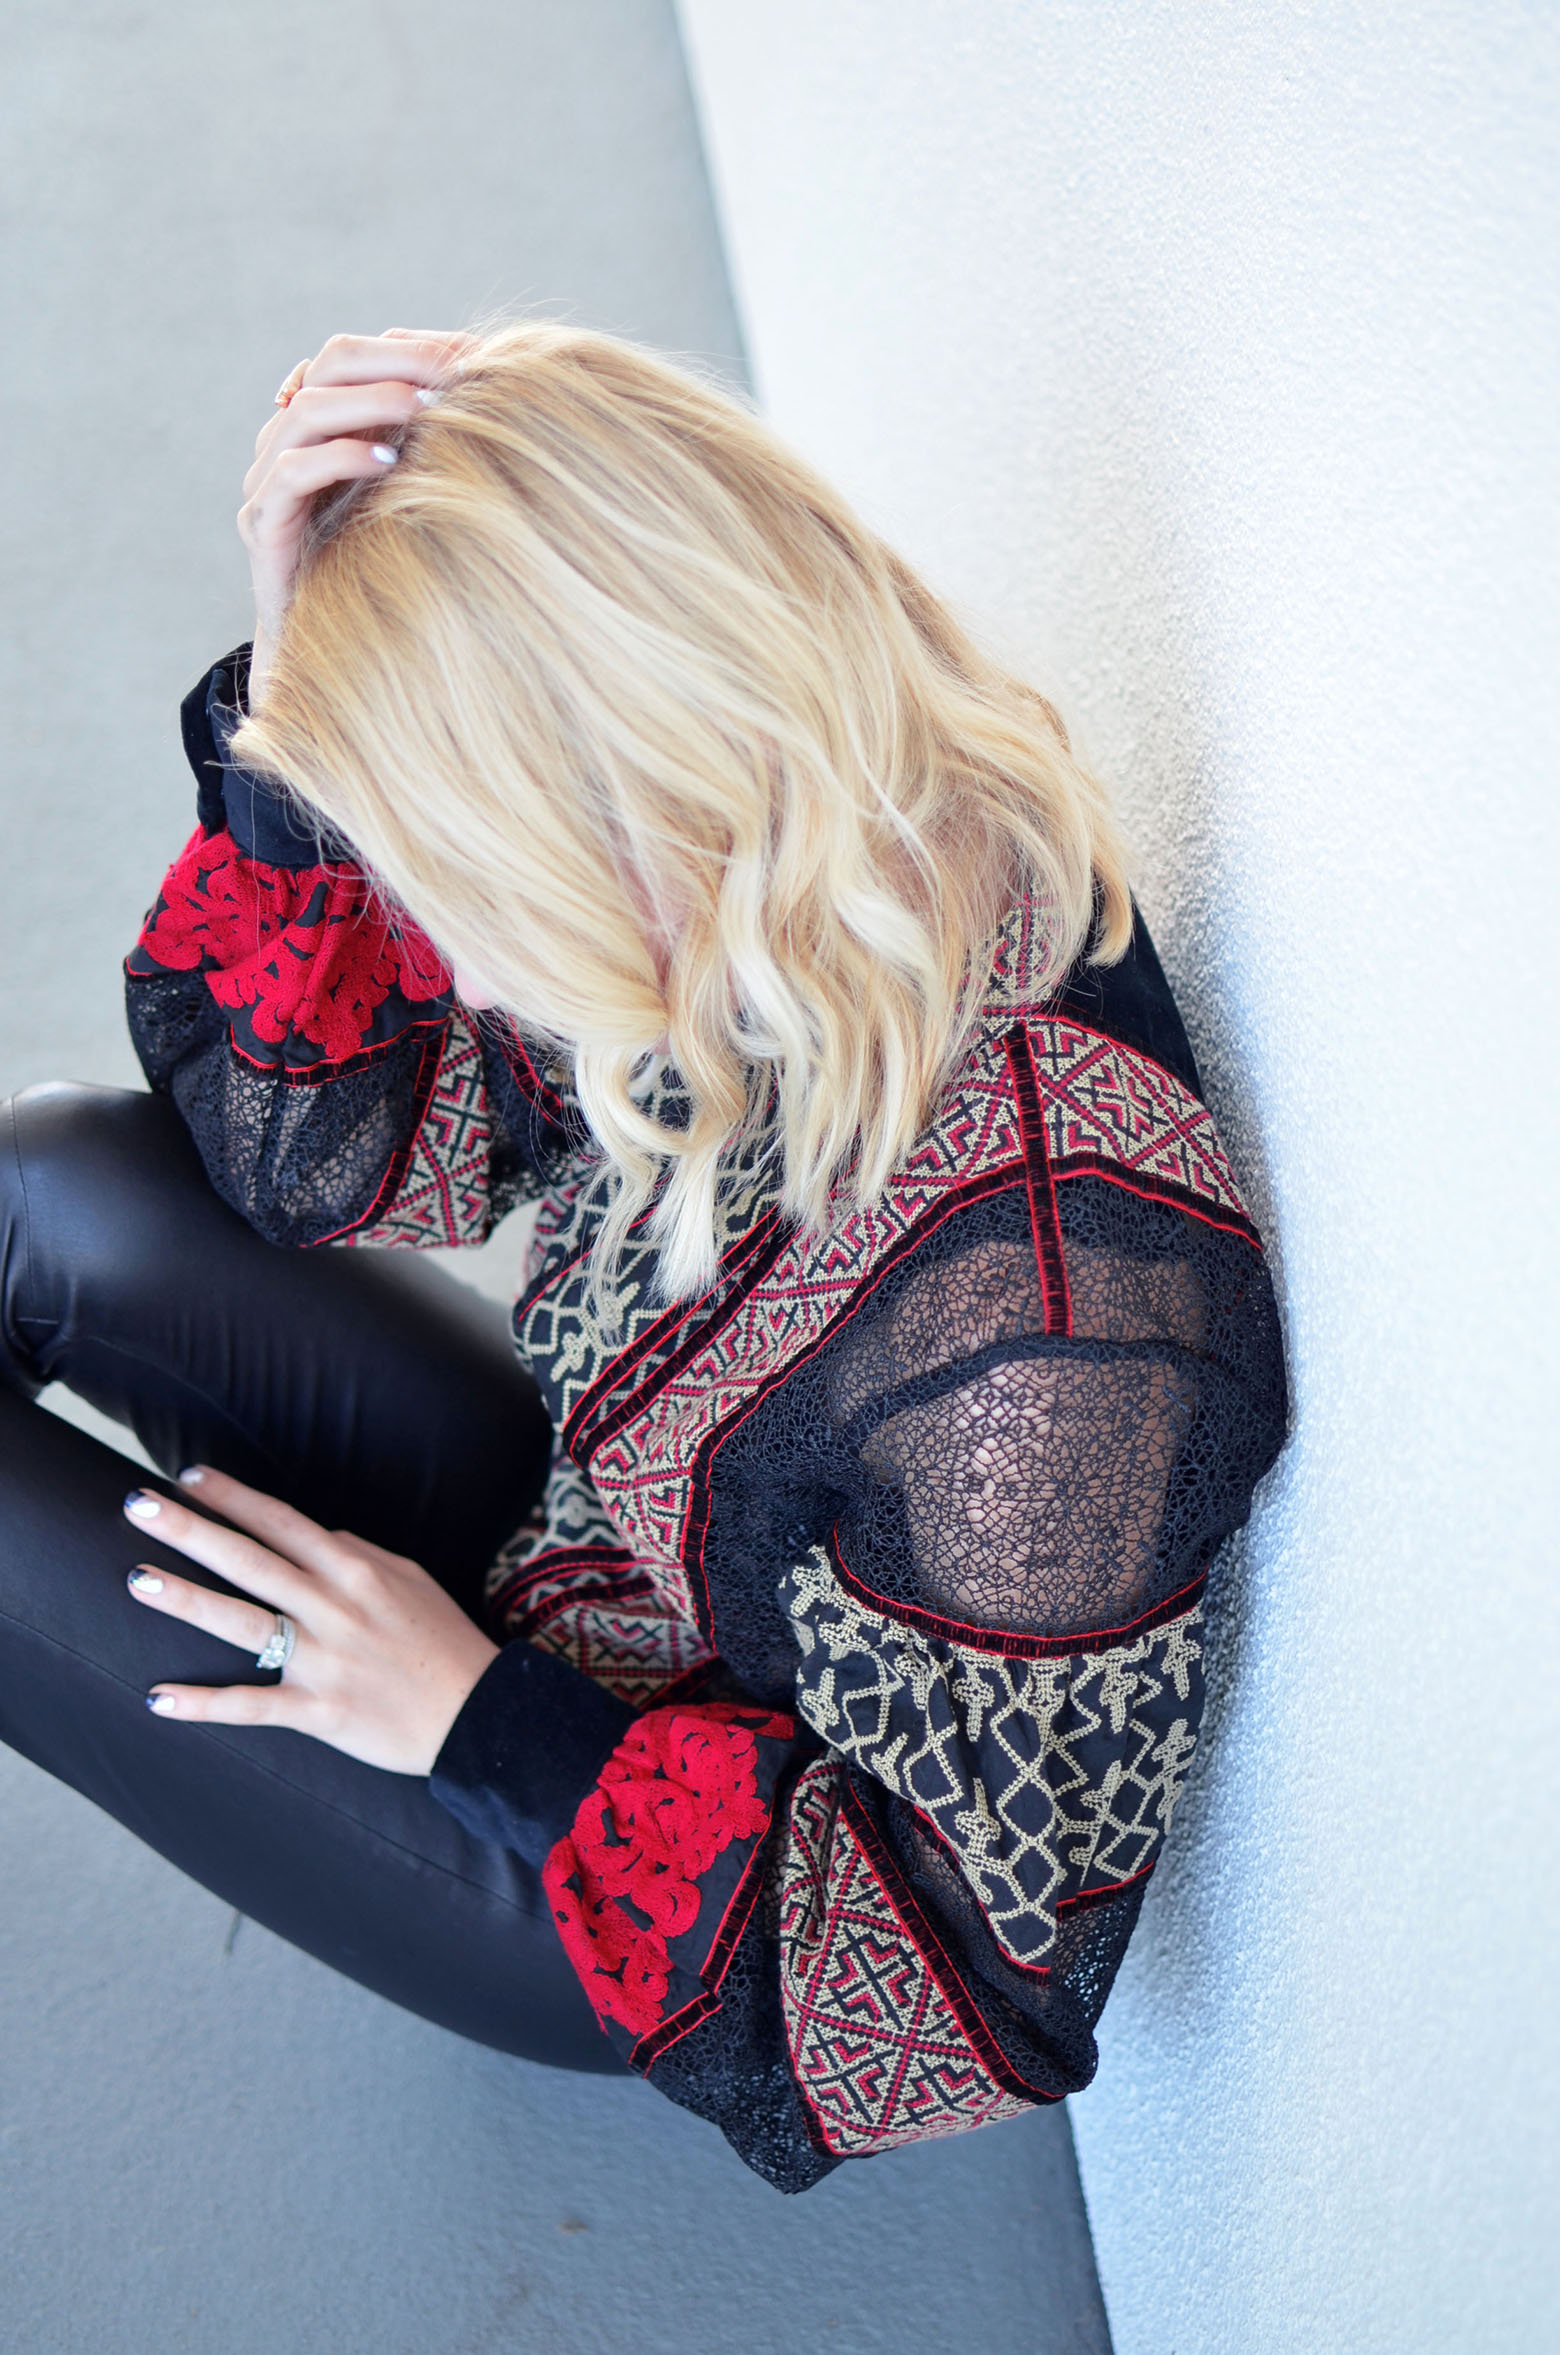 Stefanie from the style safari wears H&M Studio red black lace mesh insert top, Iris and Ink leather leggings // thestylesafari.com